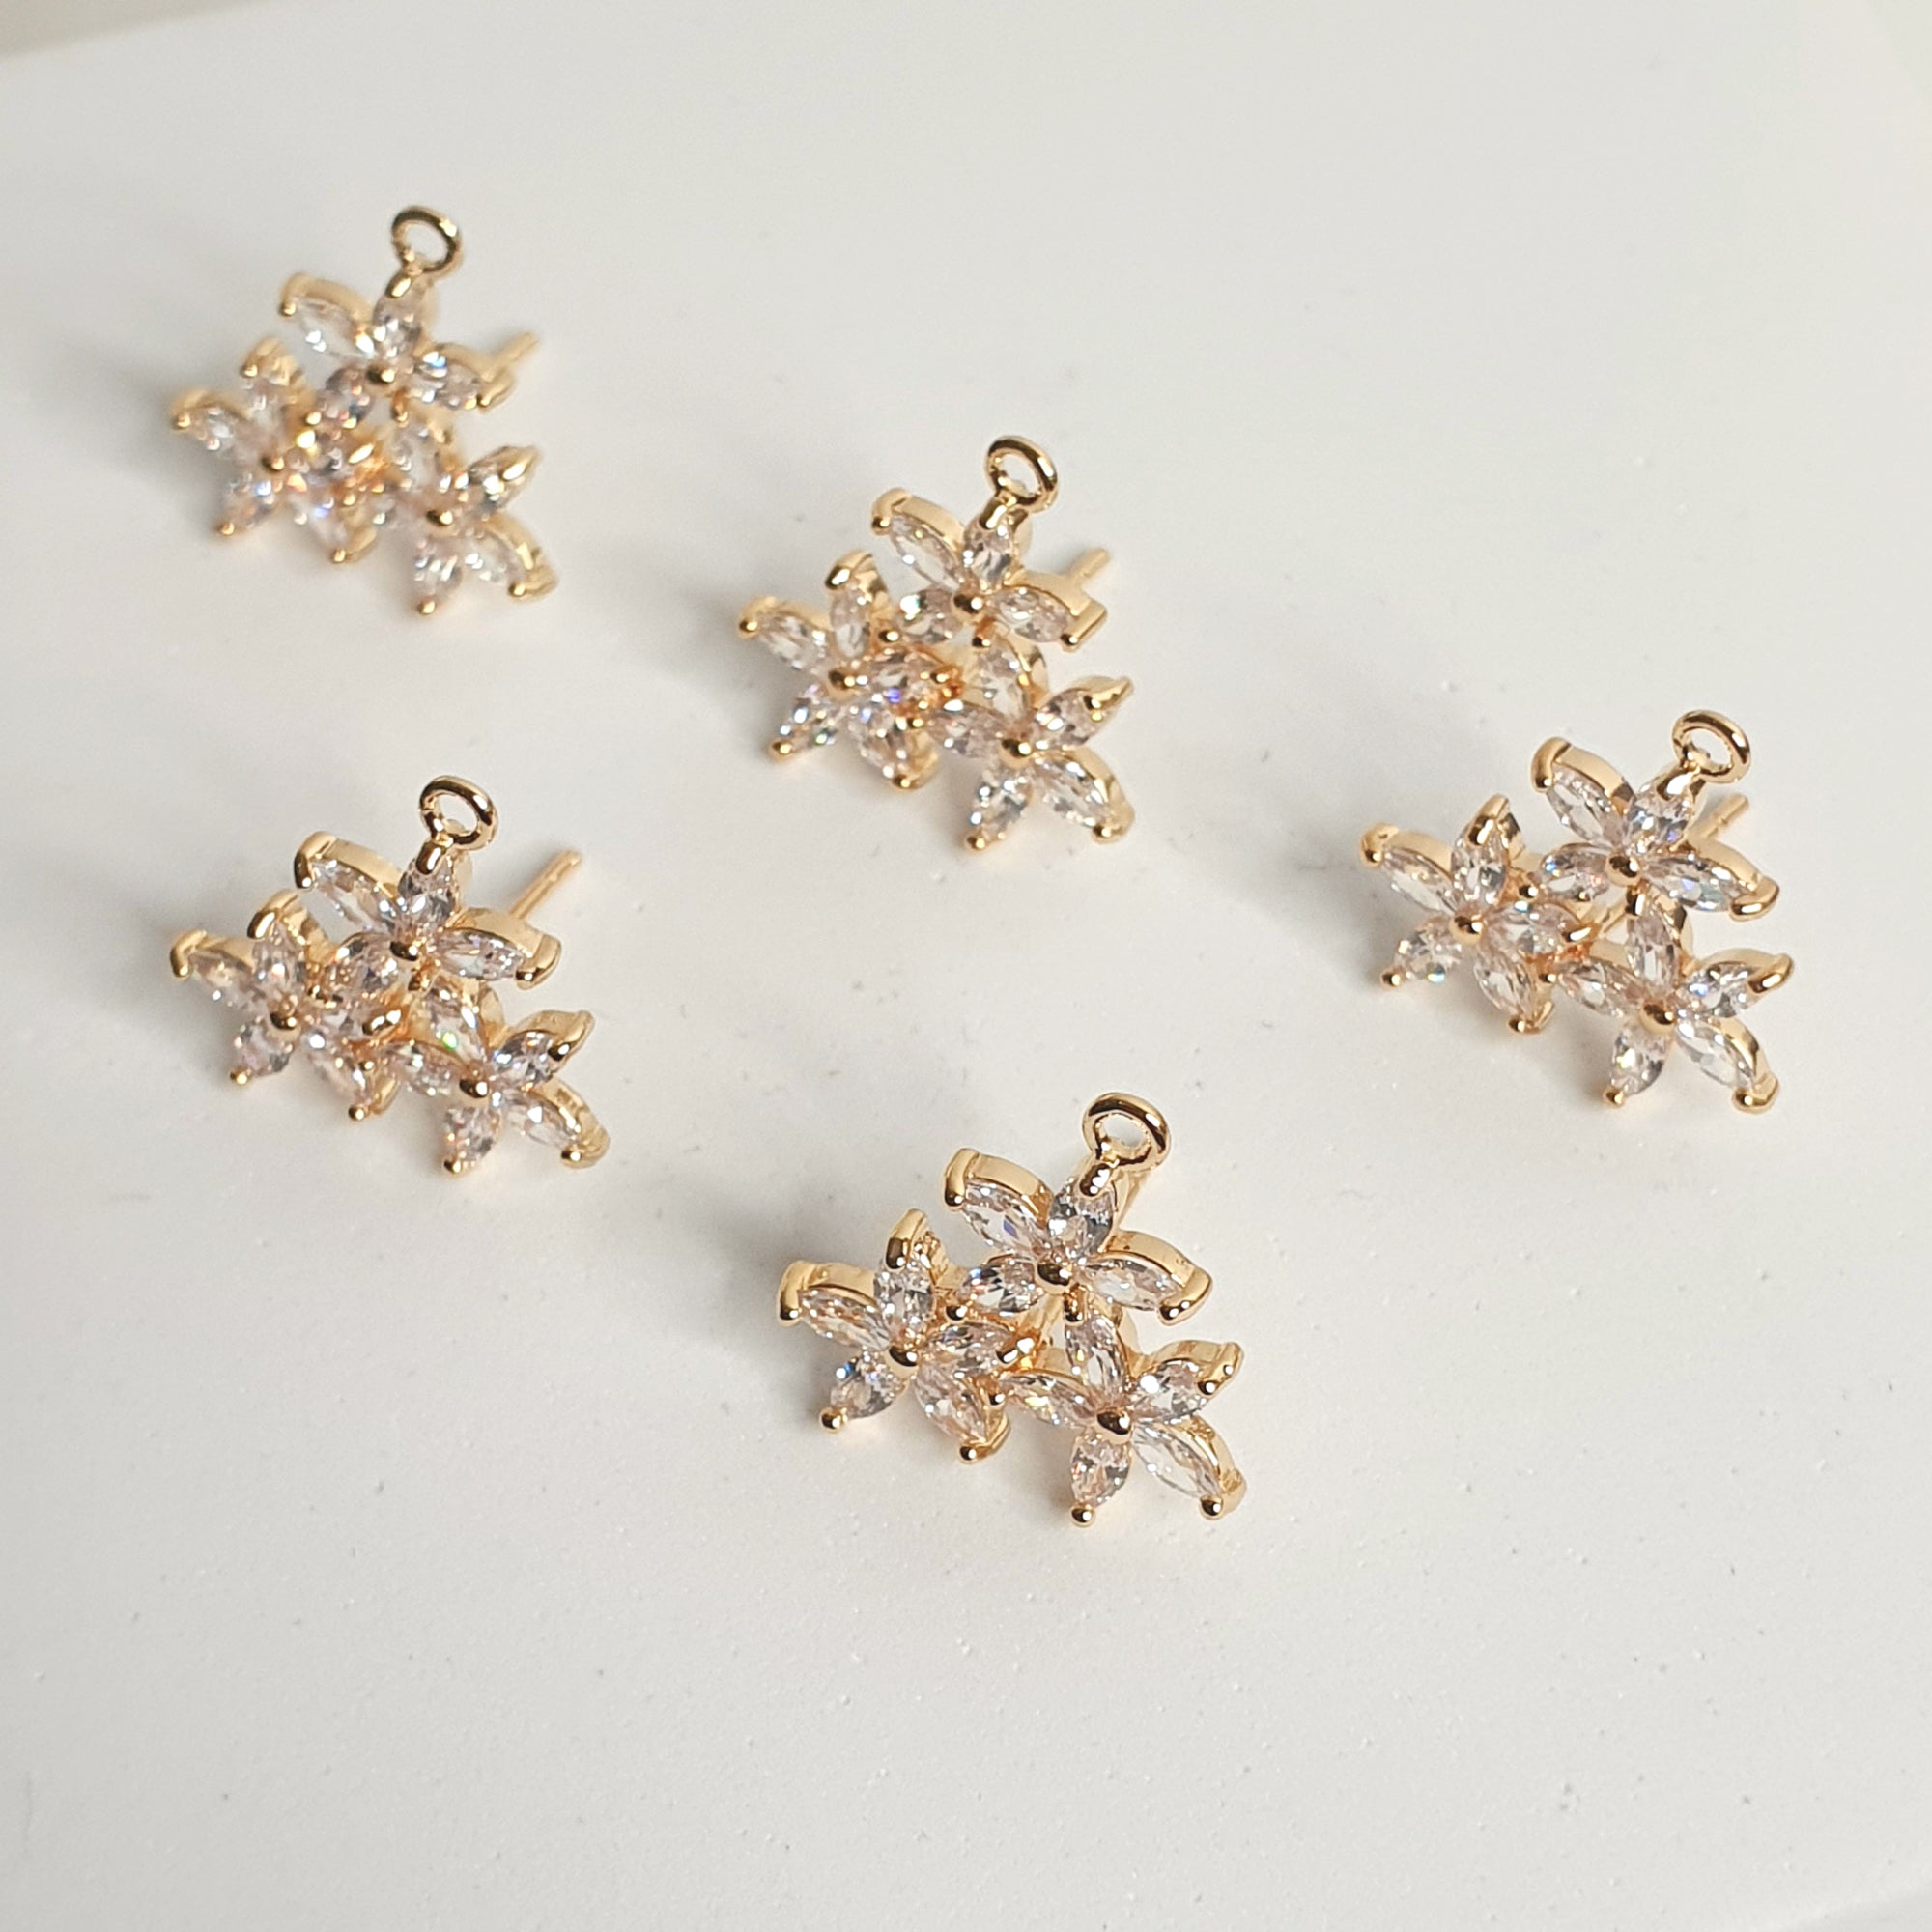 18k Gold Plated Earring Posts - Tri Star Anise - Set of 4